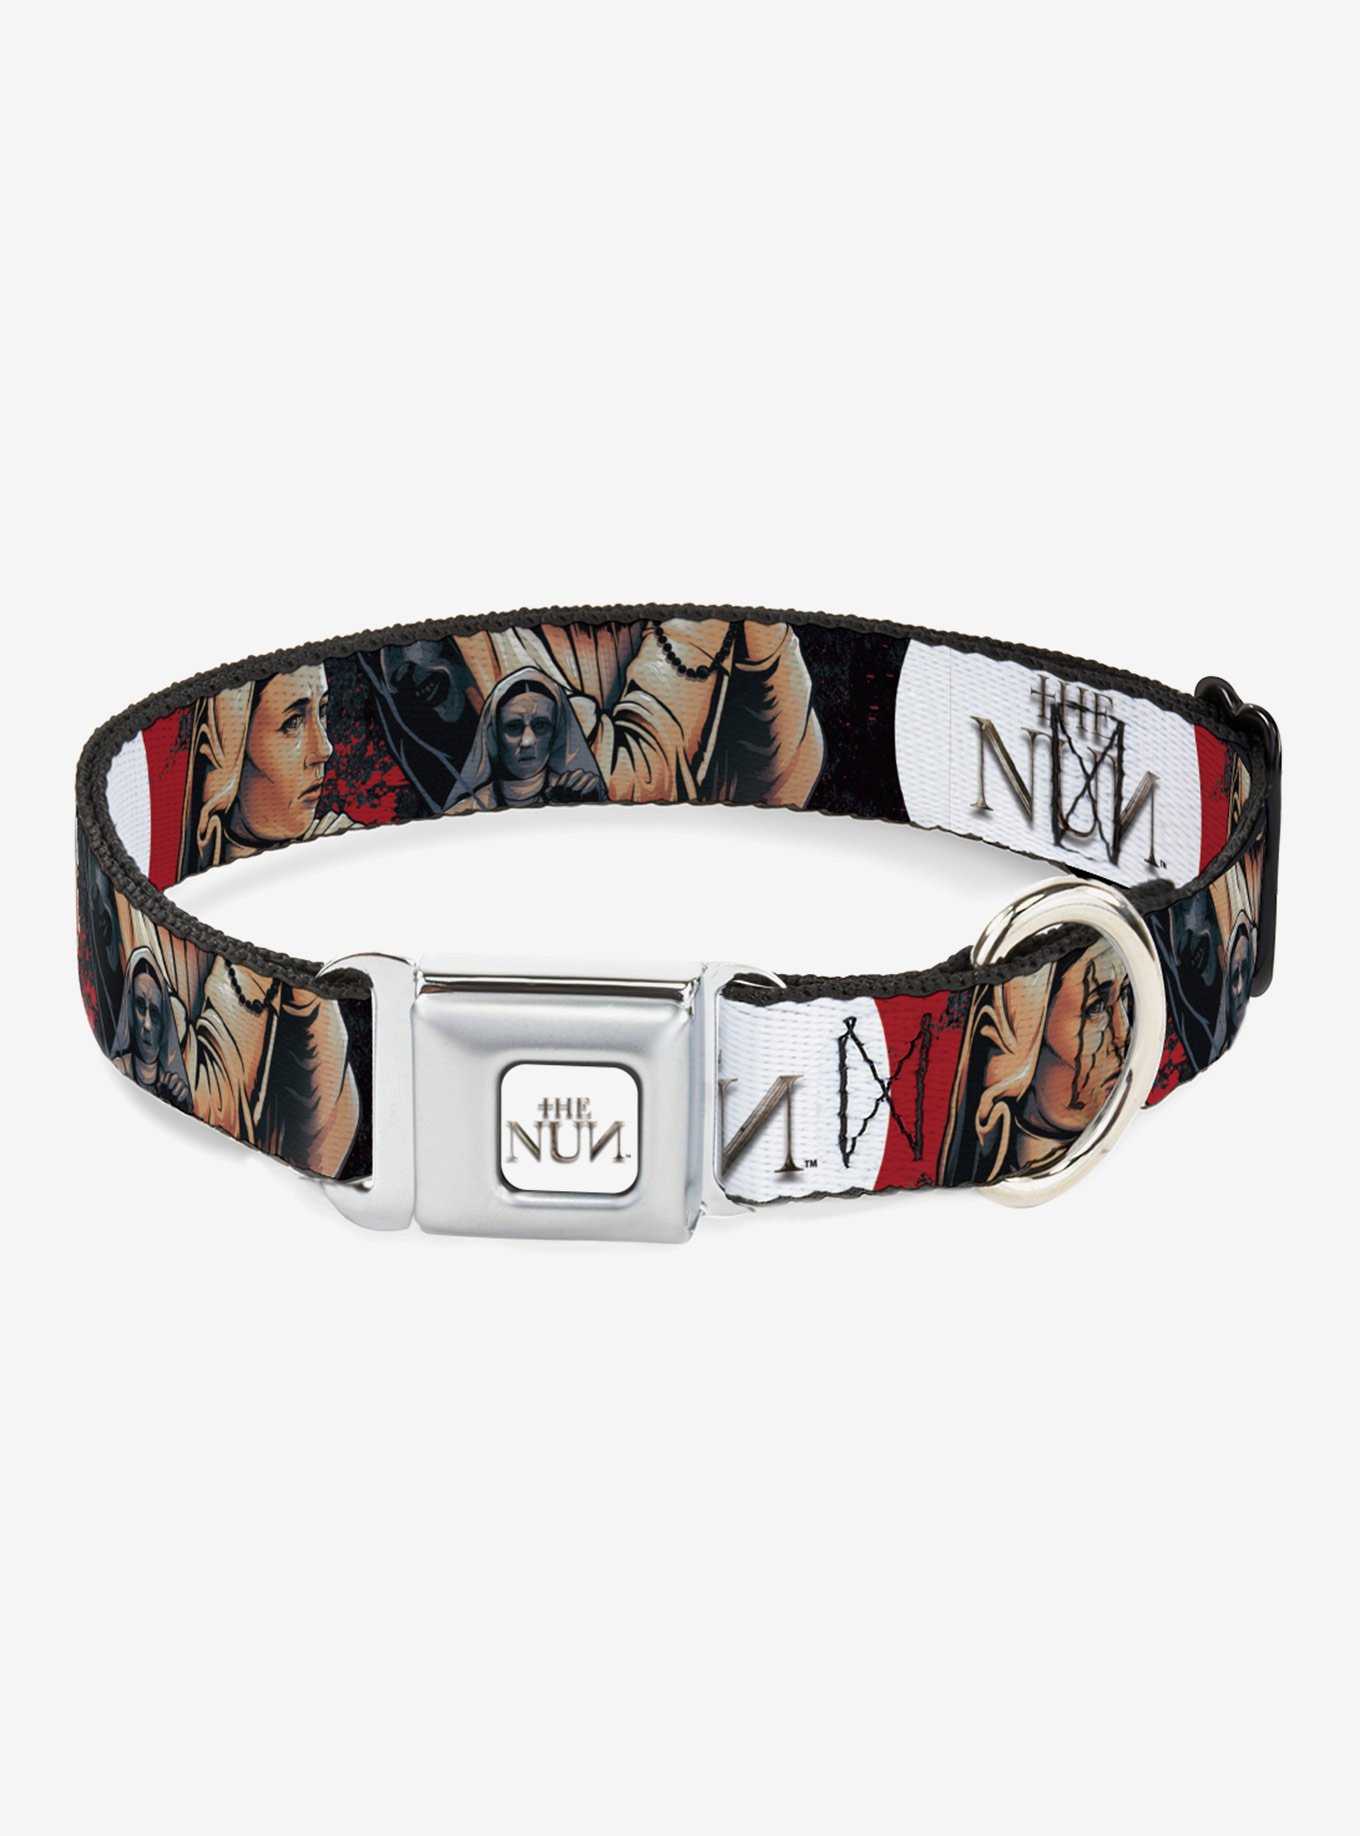 The Nun Sister Irene Poses Collage Seatbelt Buckle Dog Collar, , hi-res